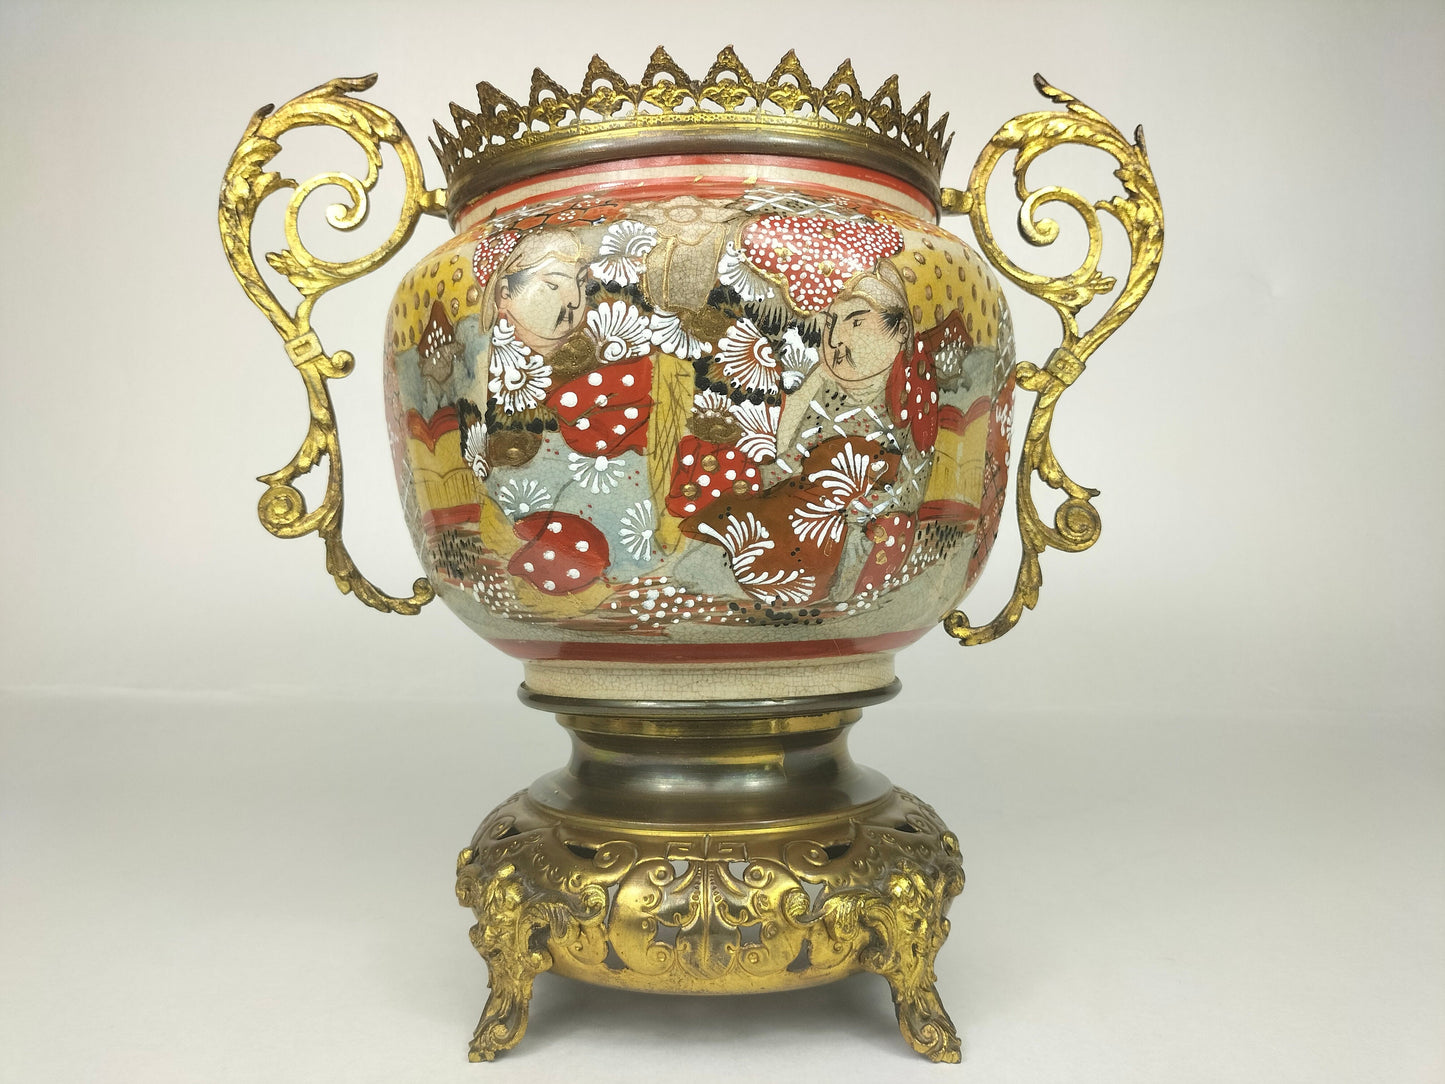 Antique Japanese satsuma jar decorated with gilded brass // 19th century - Meiji Period